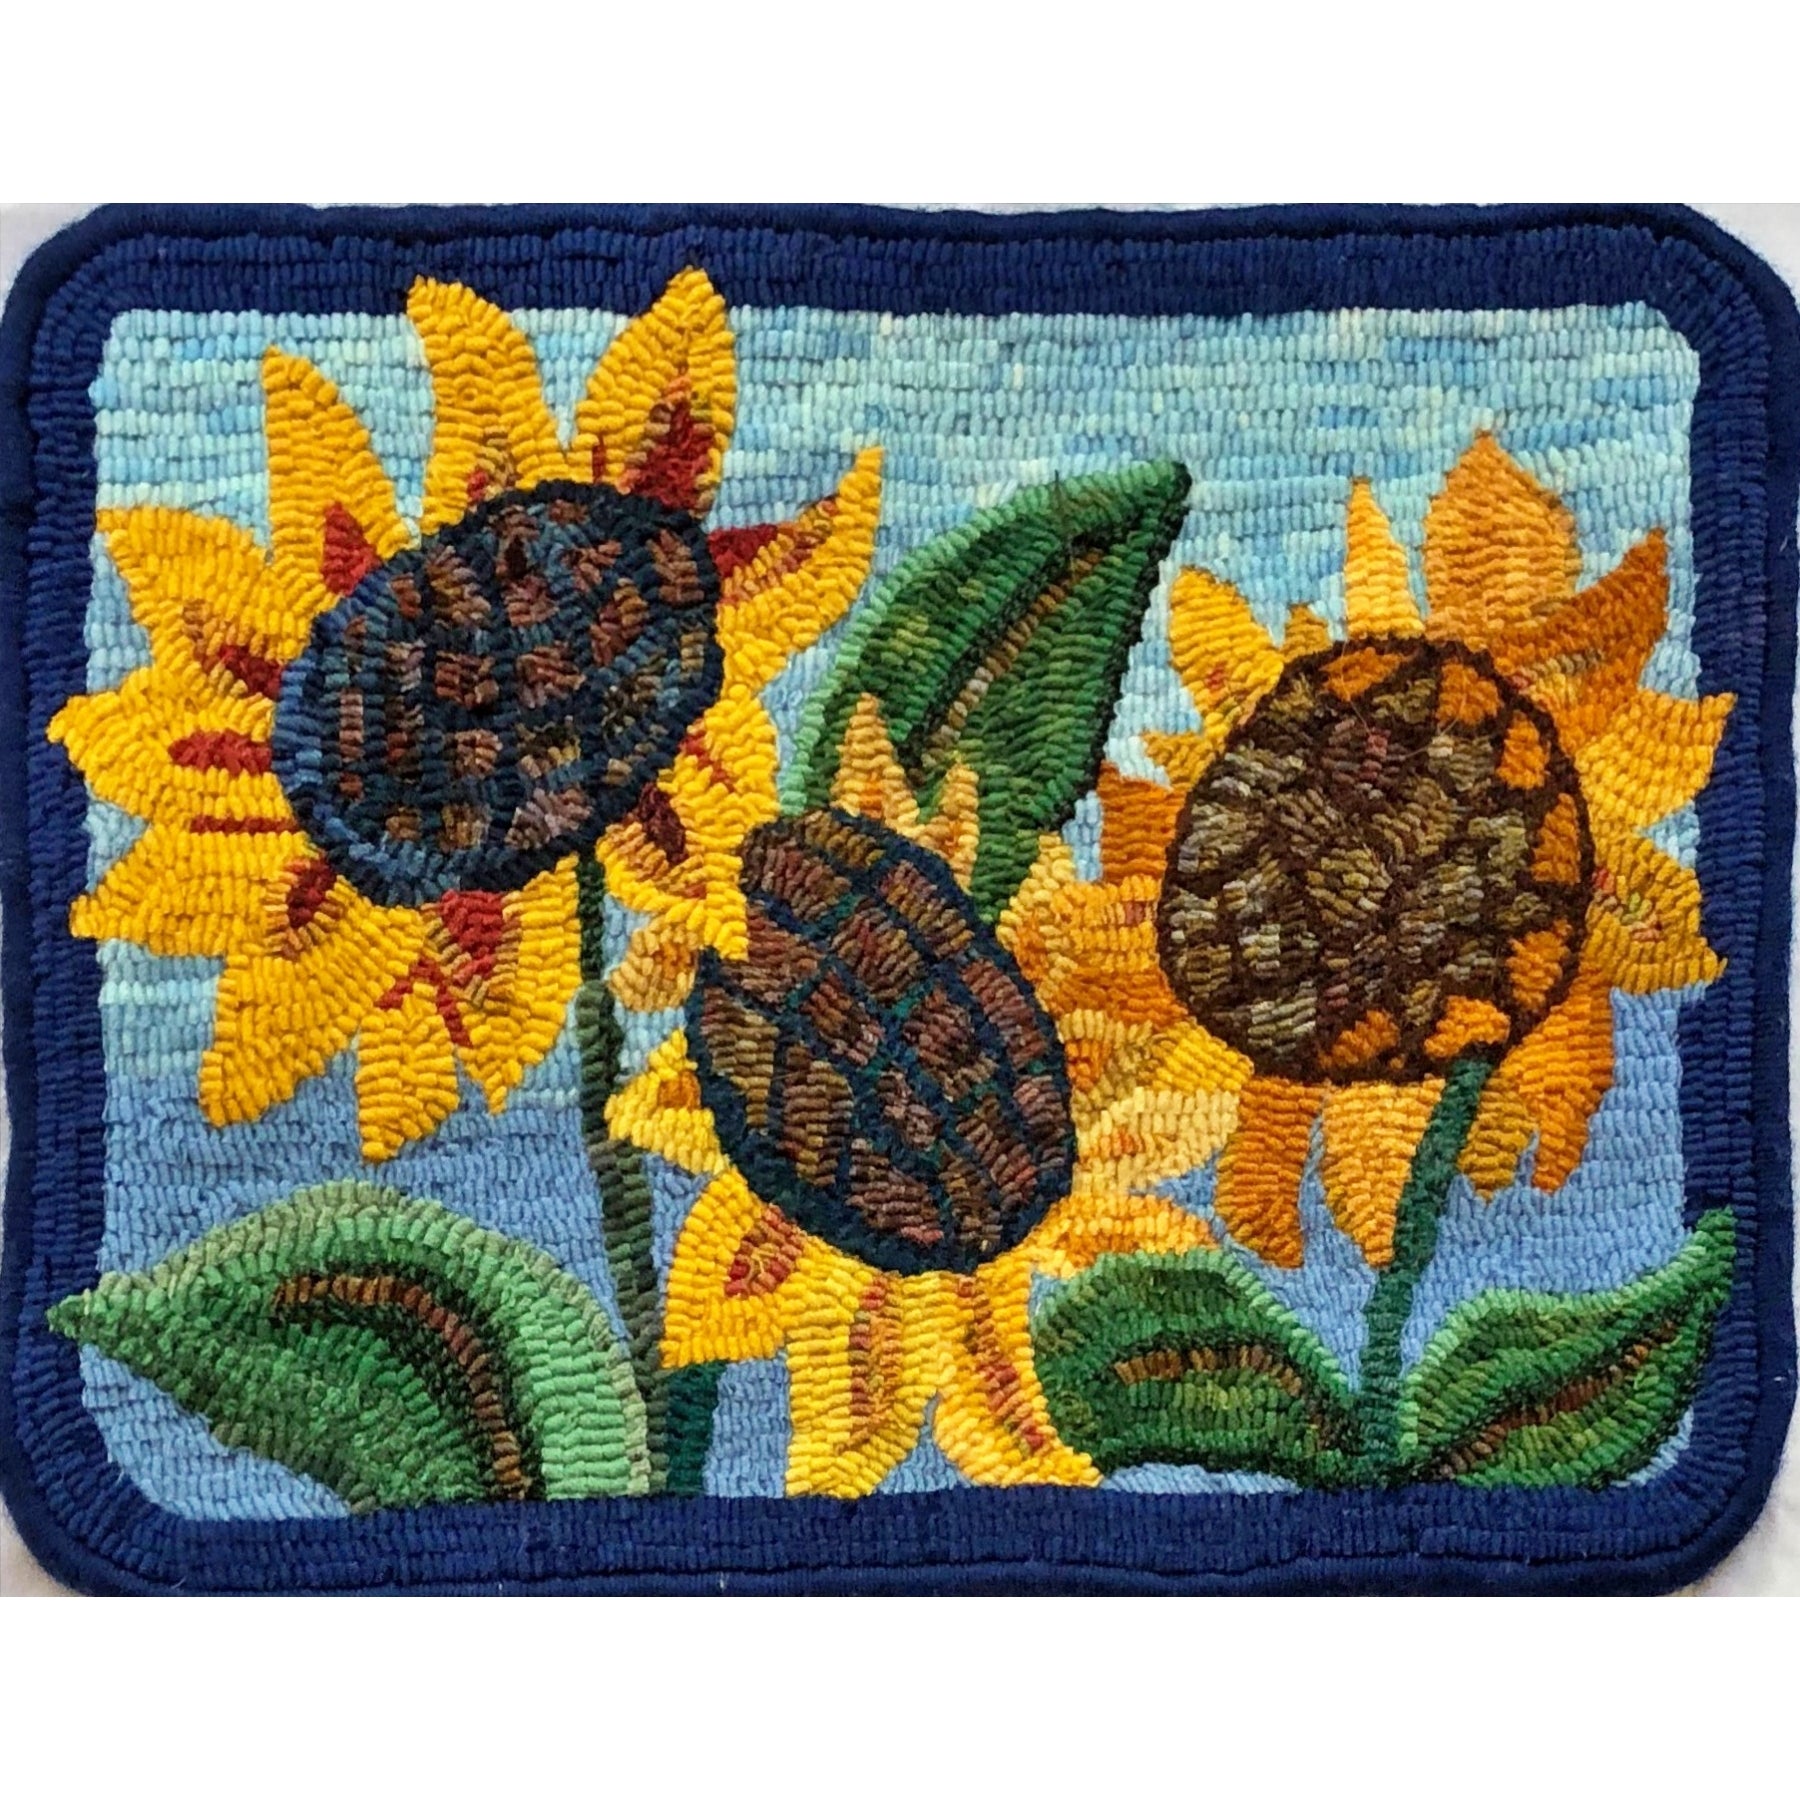 Sunflowers - Country Footstool Pattern, rug hooked by Celeste Bessette